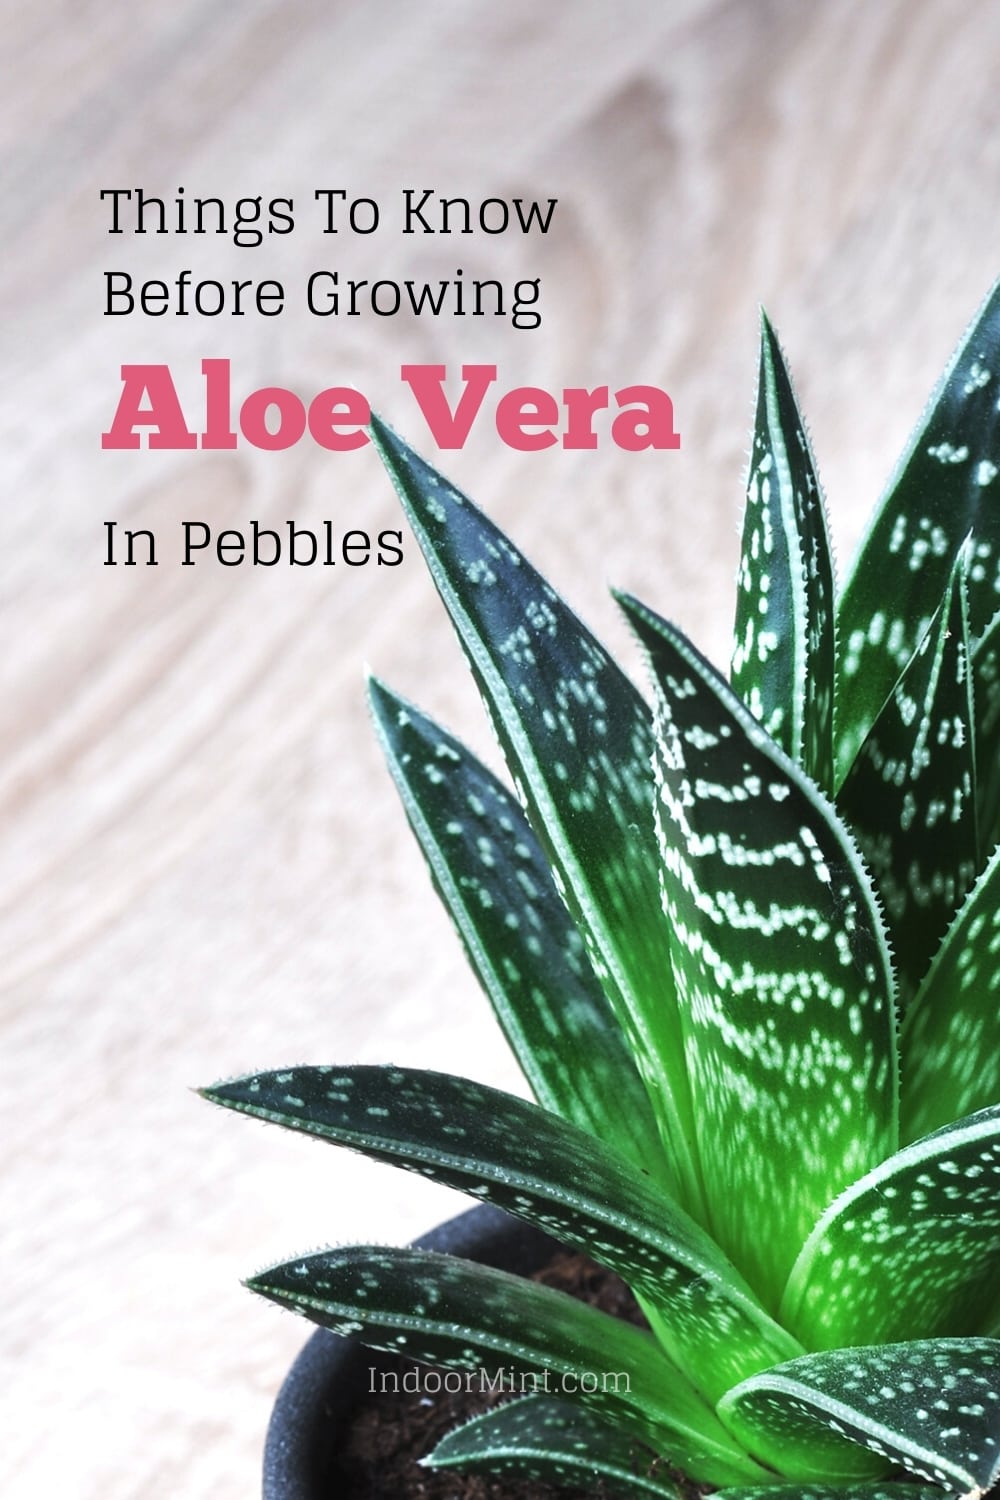 20 Things To Know Before Growing Aloe Vera In Pebbles   Indoor Mint